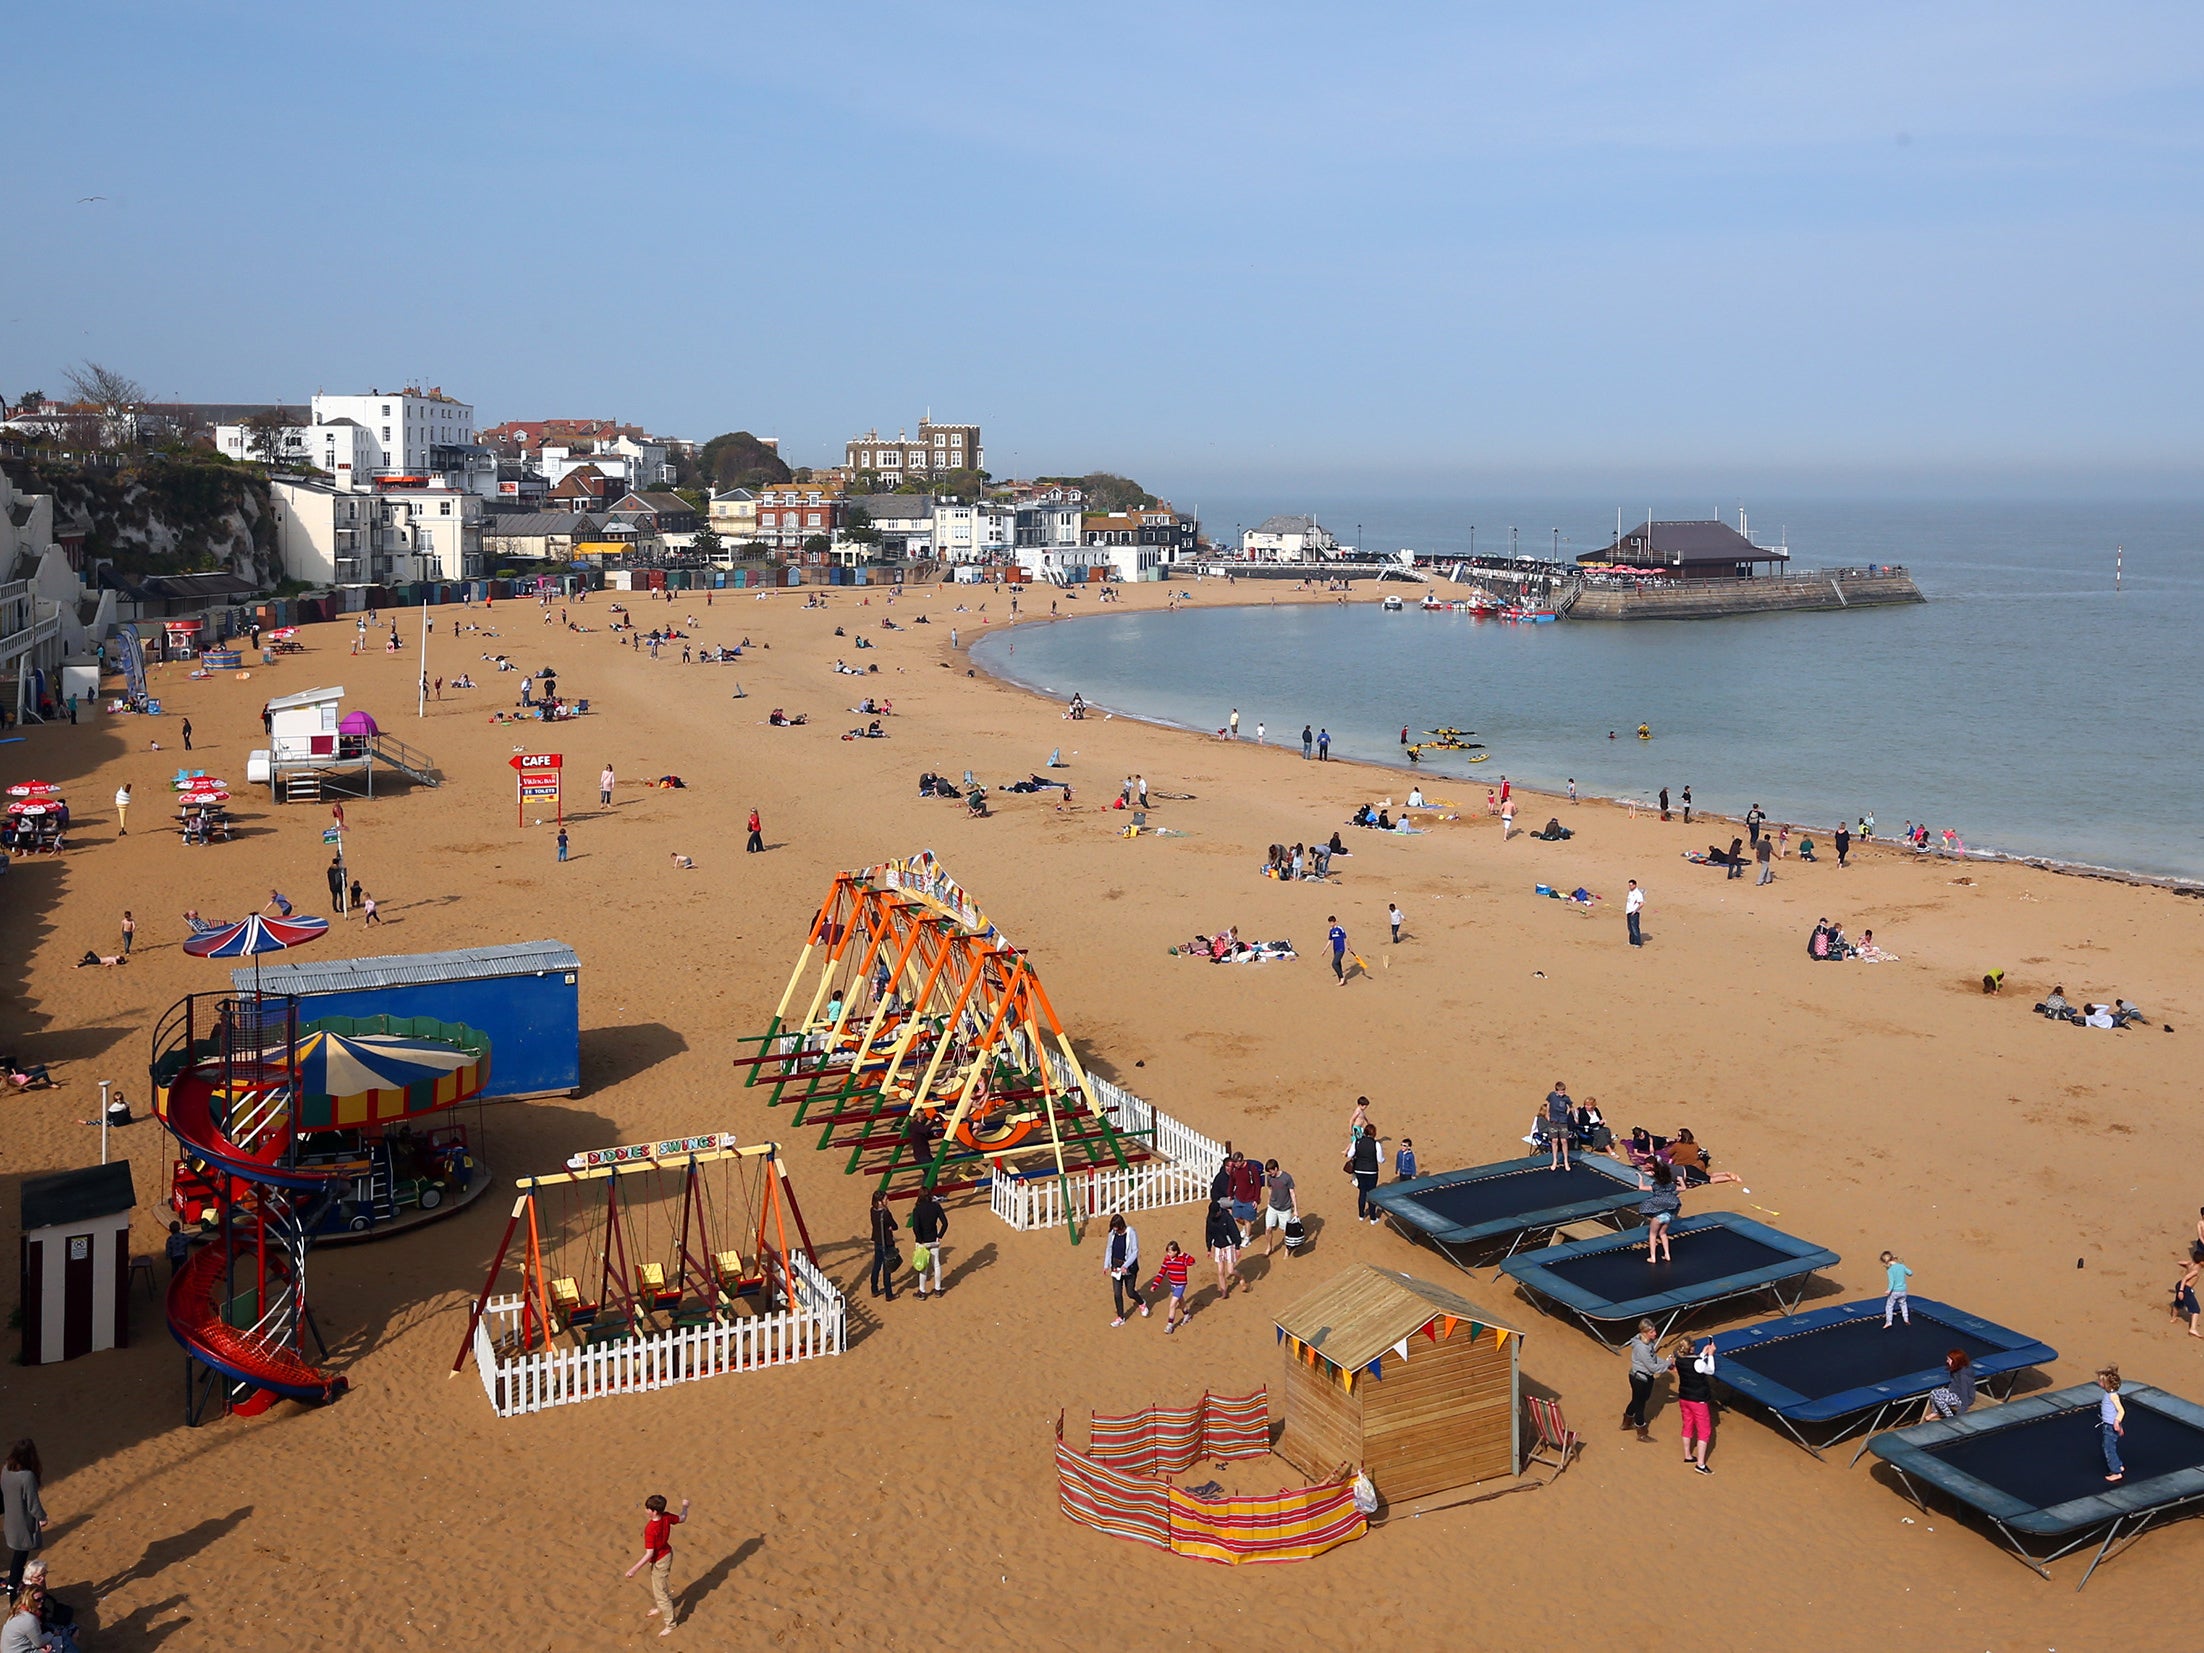 This summer, migrants may begin arriving in Britain via our vast coastline, such as at the beach town of Broadstairs in Kent